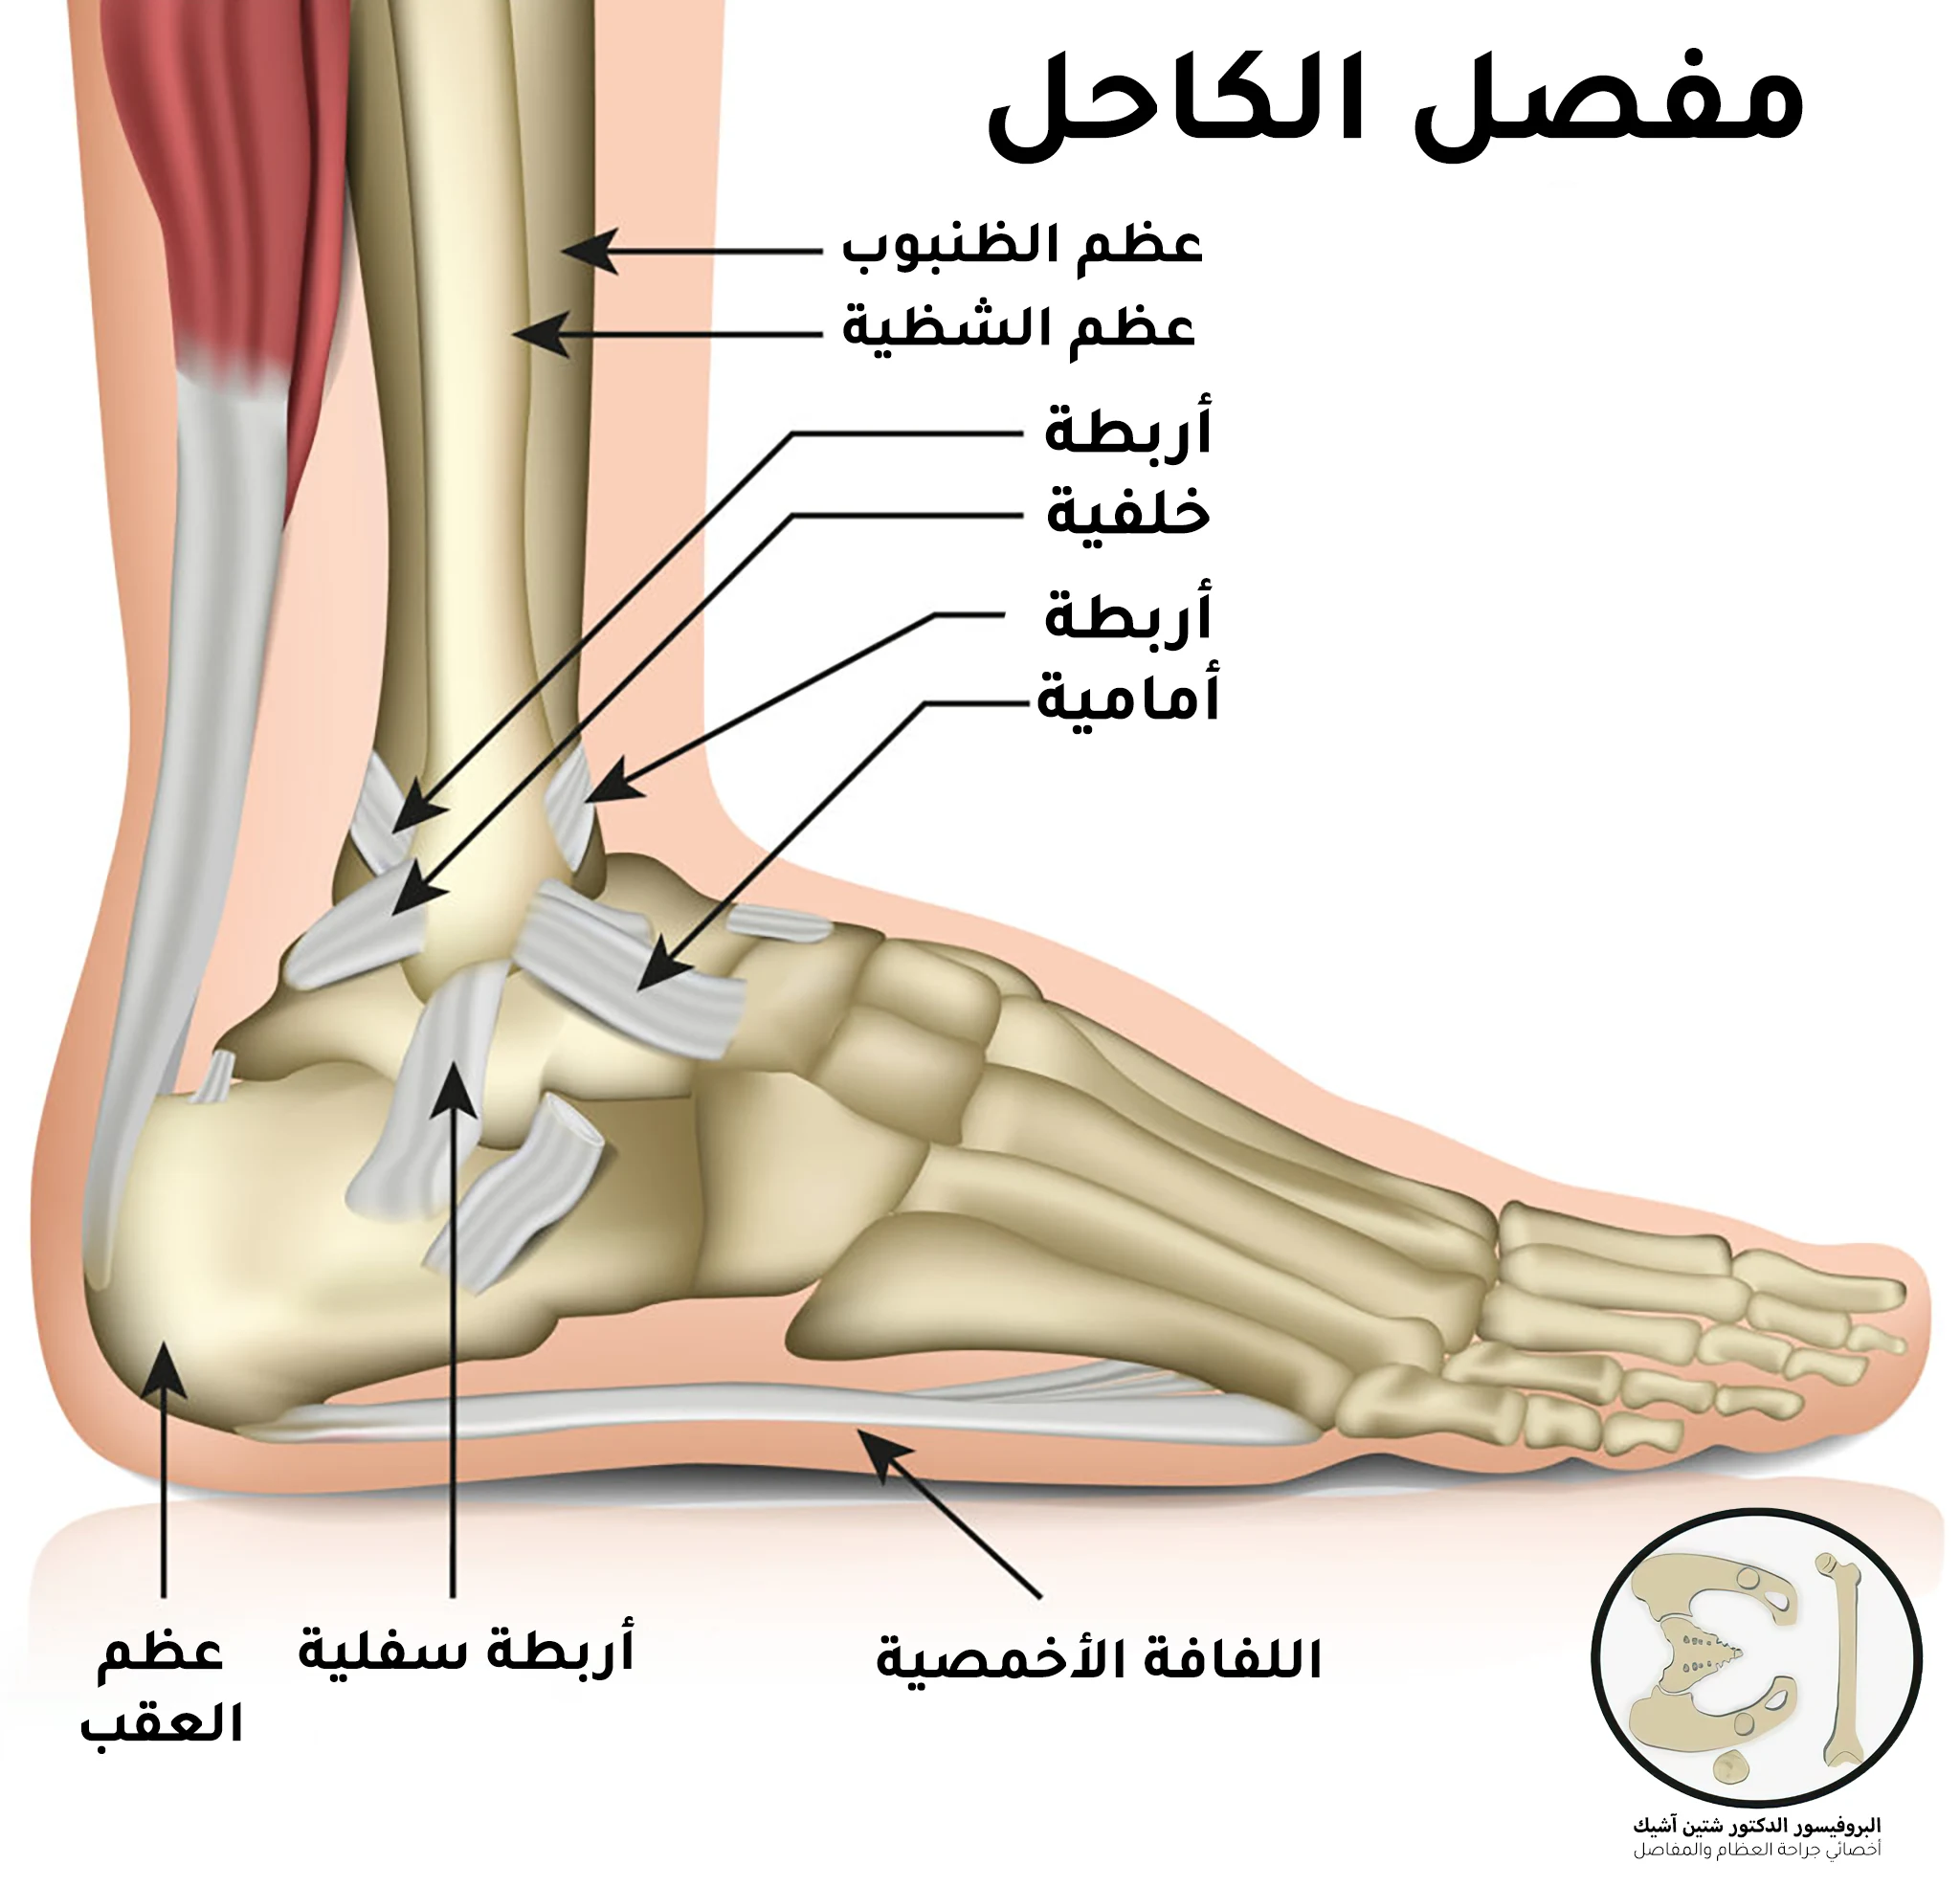 An image showing the joint of the foot